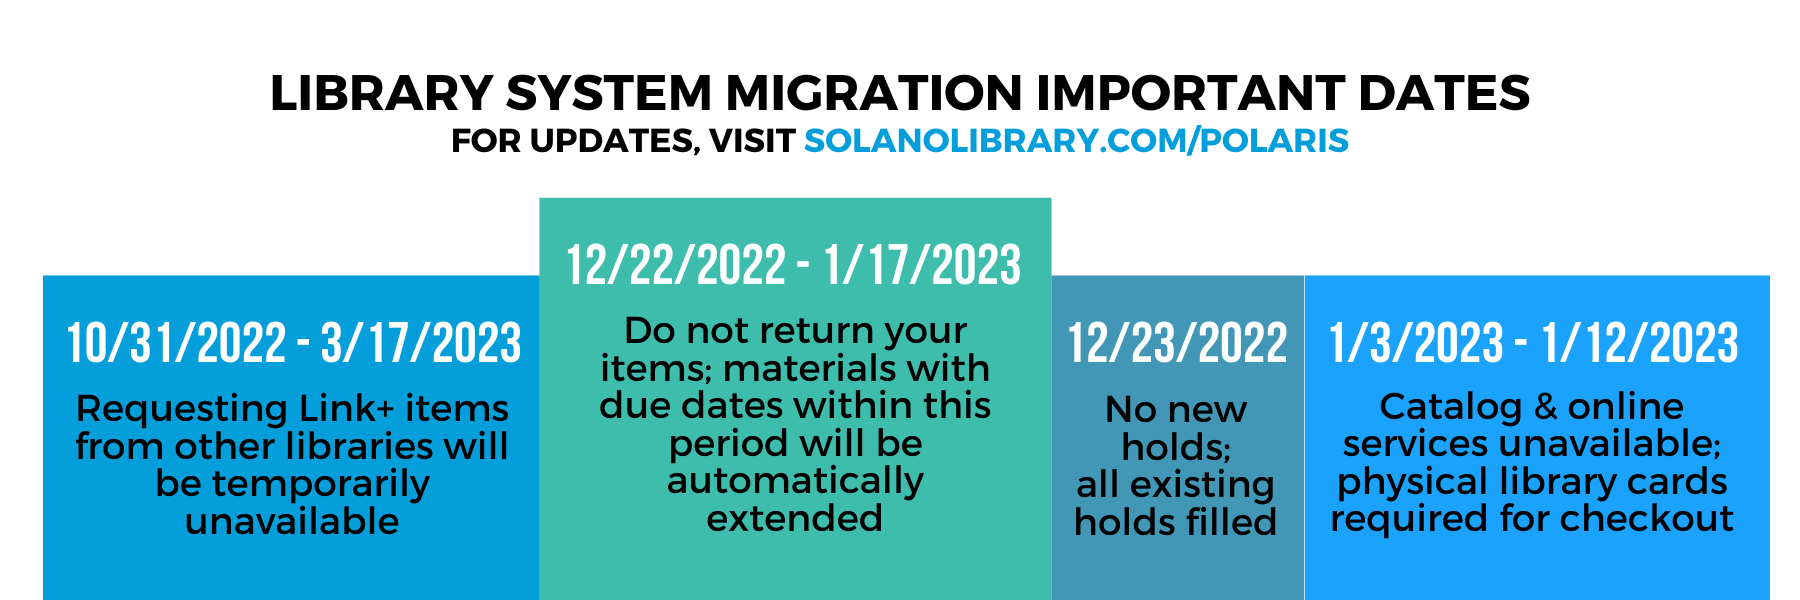 Visit solanolibrary.com/polaris for a list of important dates regarding our library system migration dates!